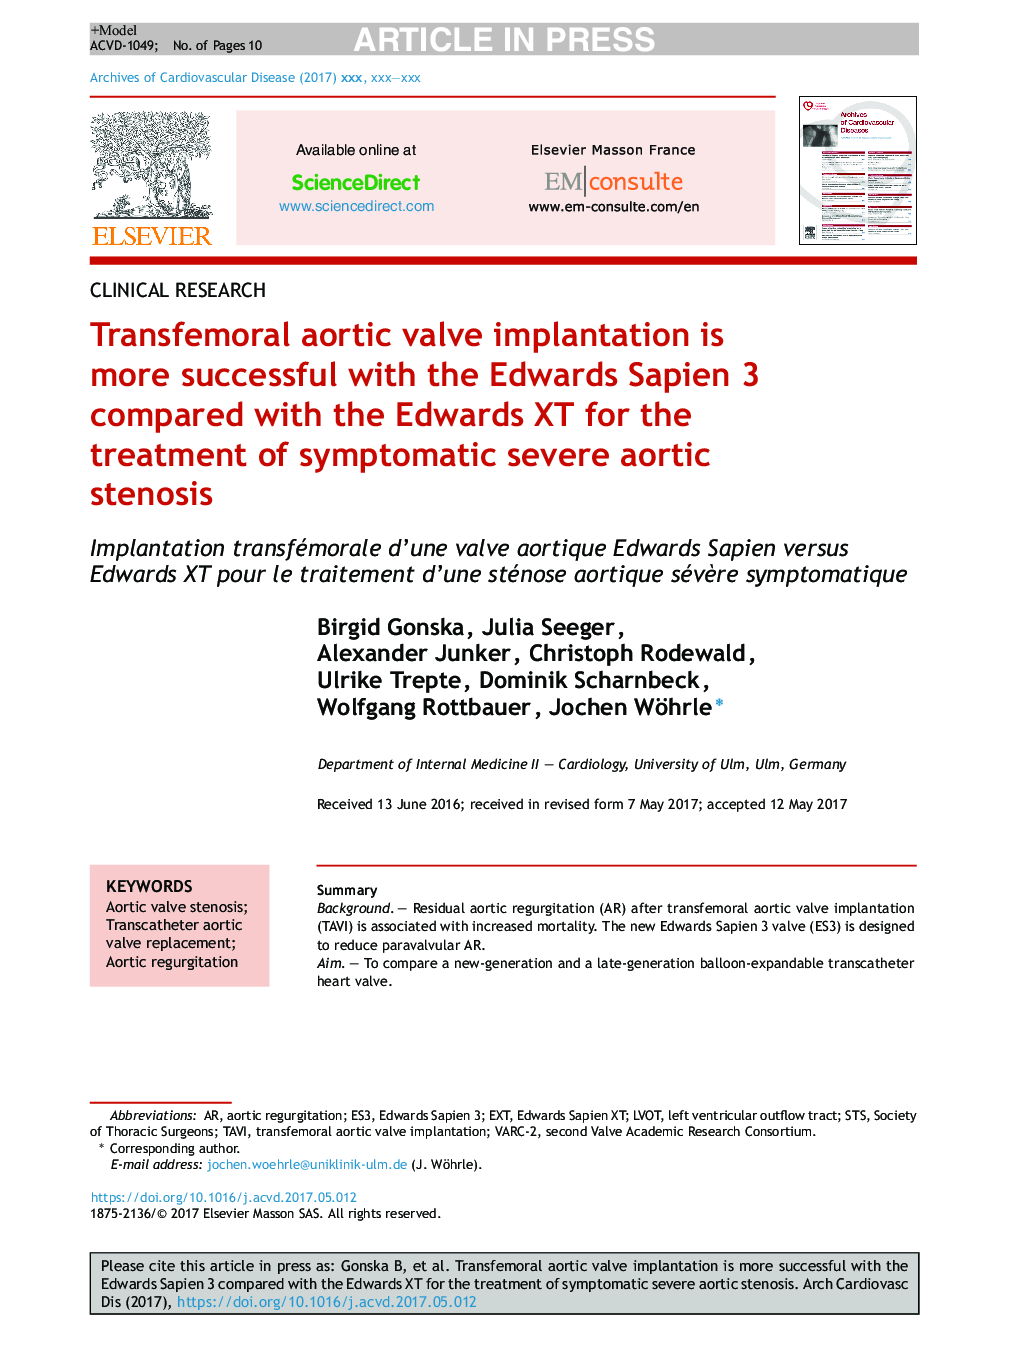 Transfemoral aortic valve implantation is more successful with the Edwards Sapien 3 compared with the Edwards XT for the treatment of symptomatic severe aortic stenosis